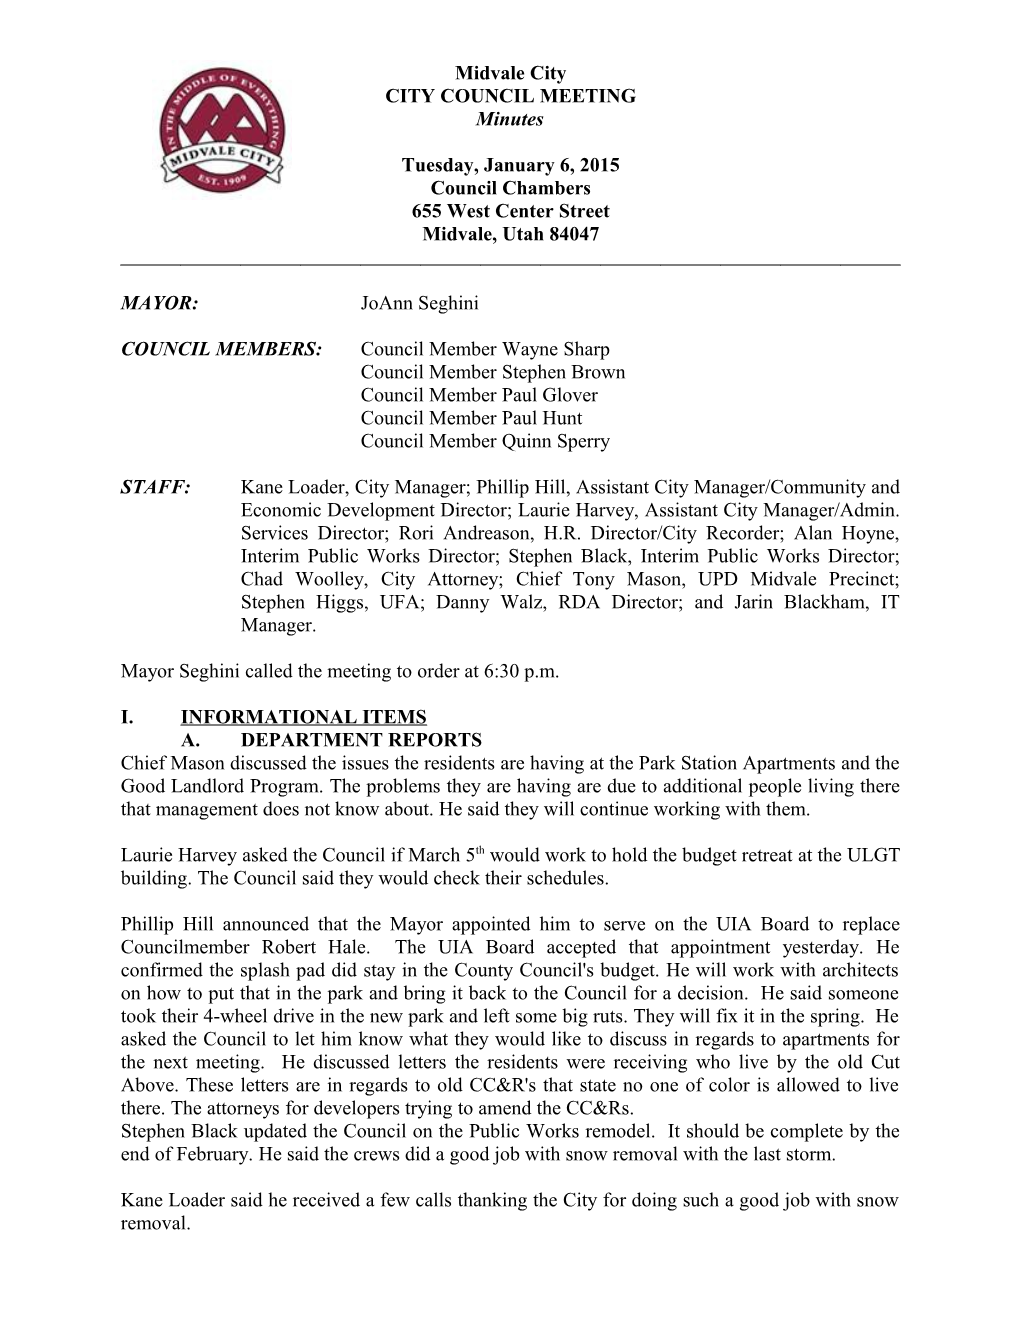 Proceedings of the Midvale City Council Meeting